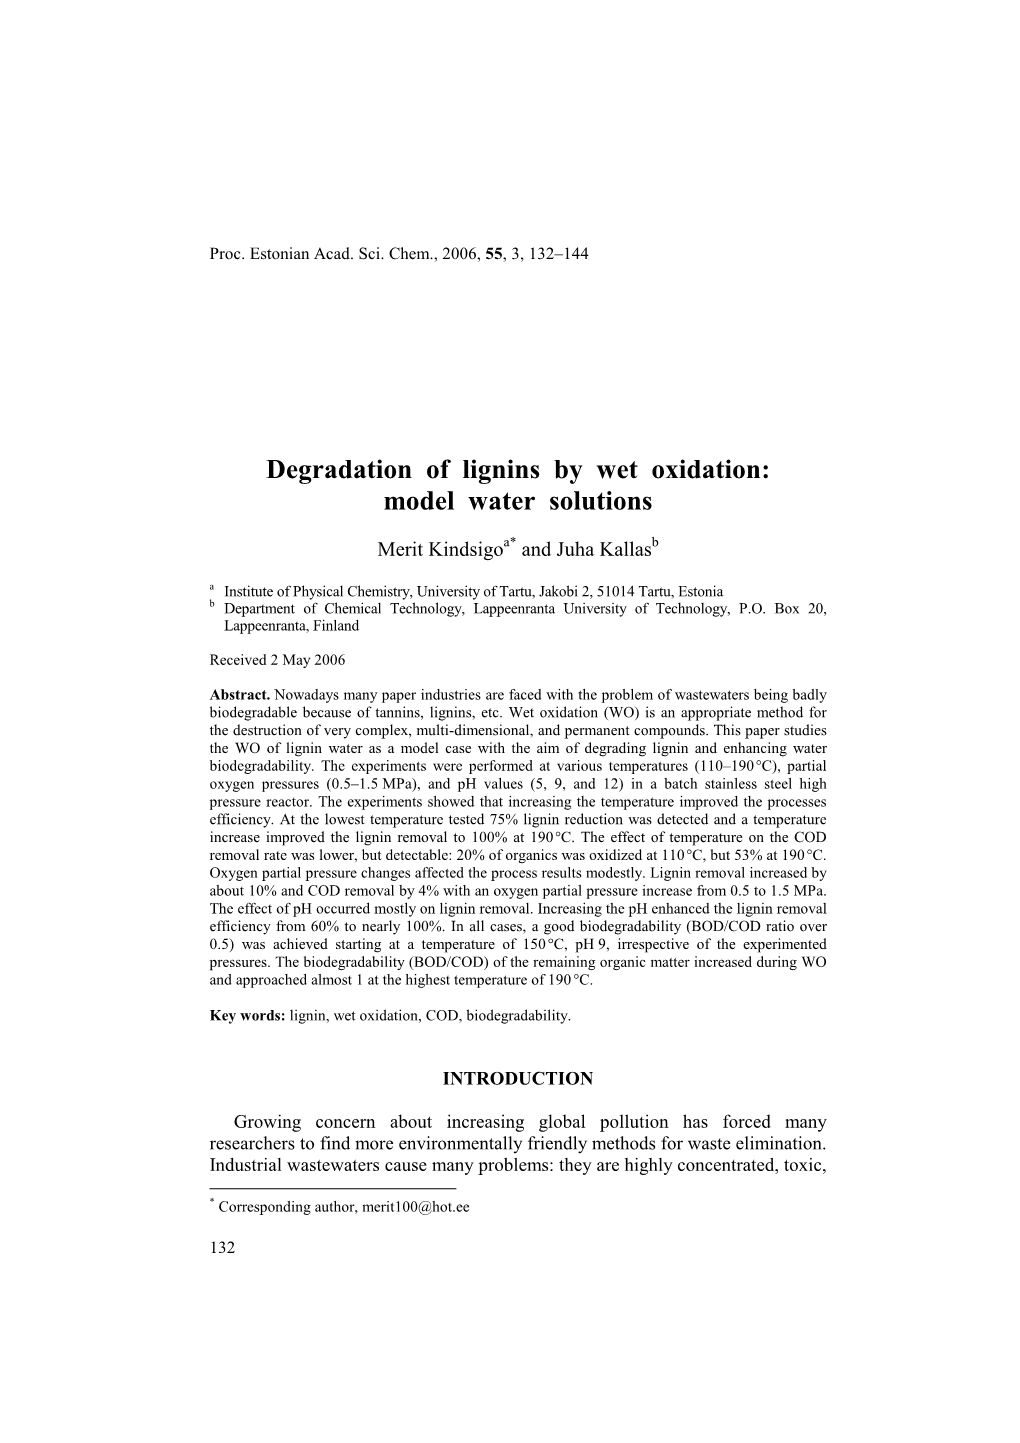 Degradation of Lignins by Wet Oxidation: Model Water Solutions